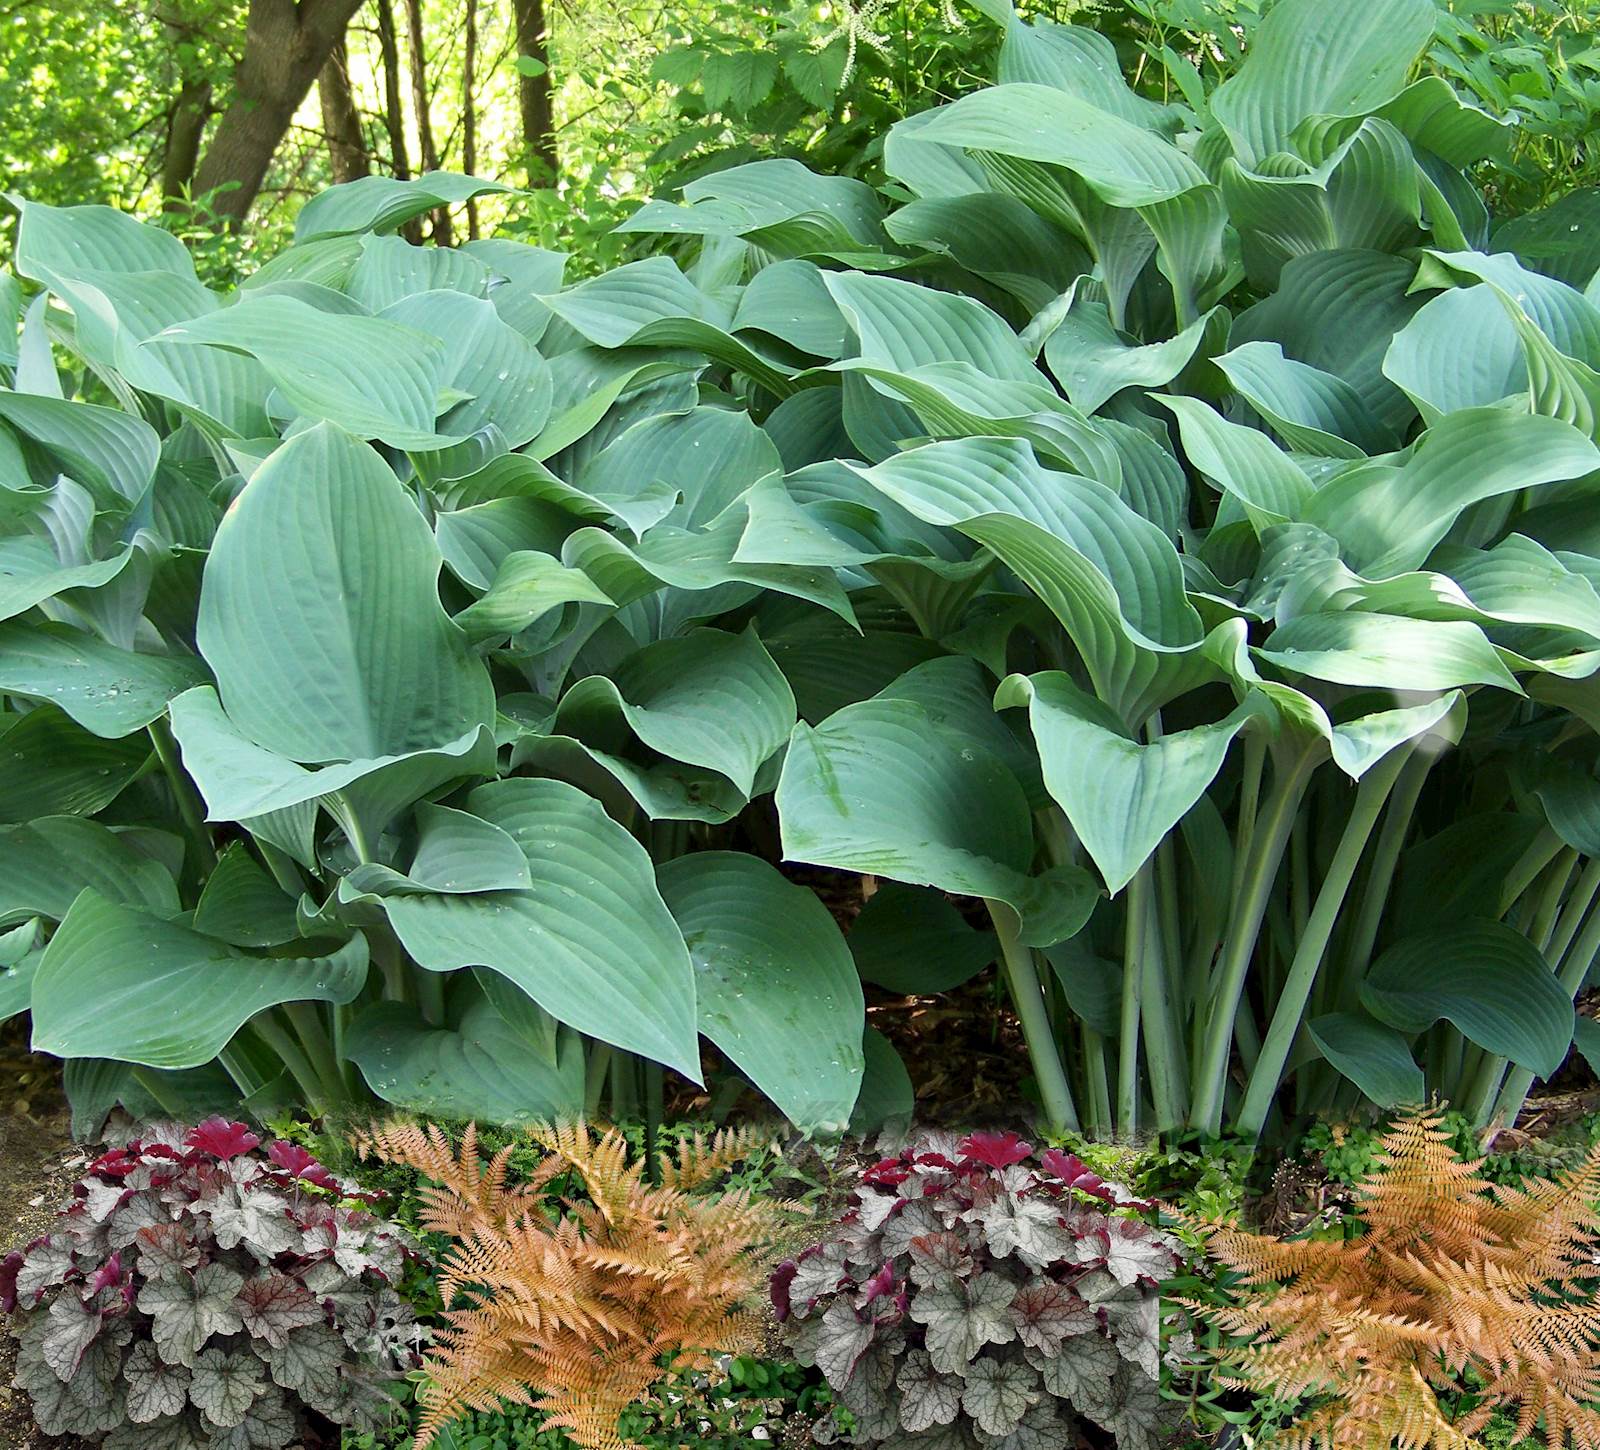 Combined image of hosta, coral bells, and ferns.